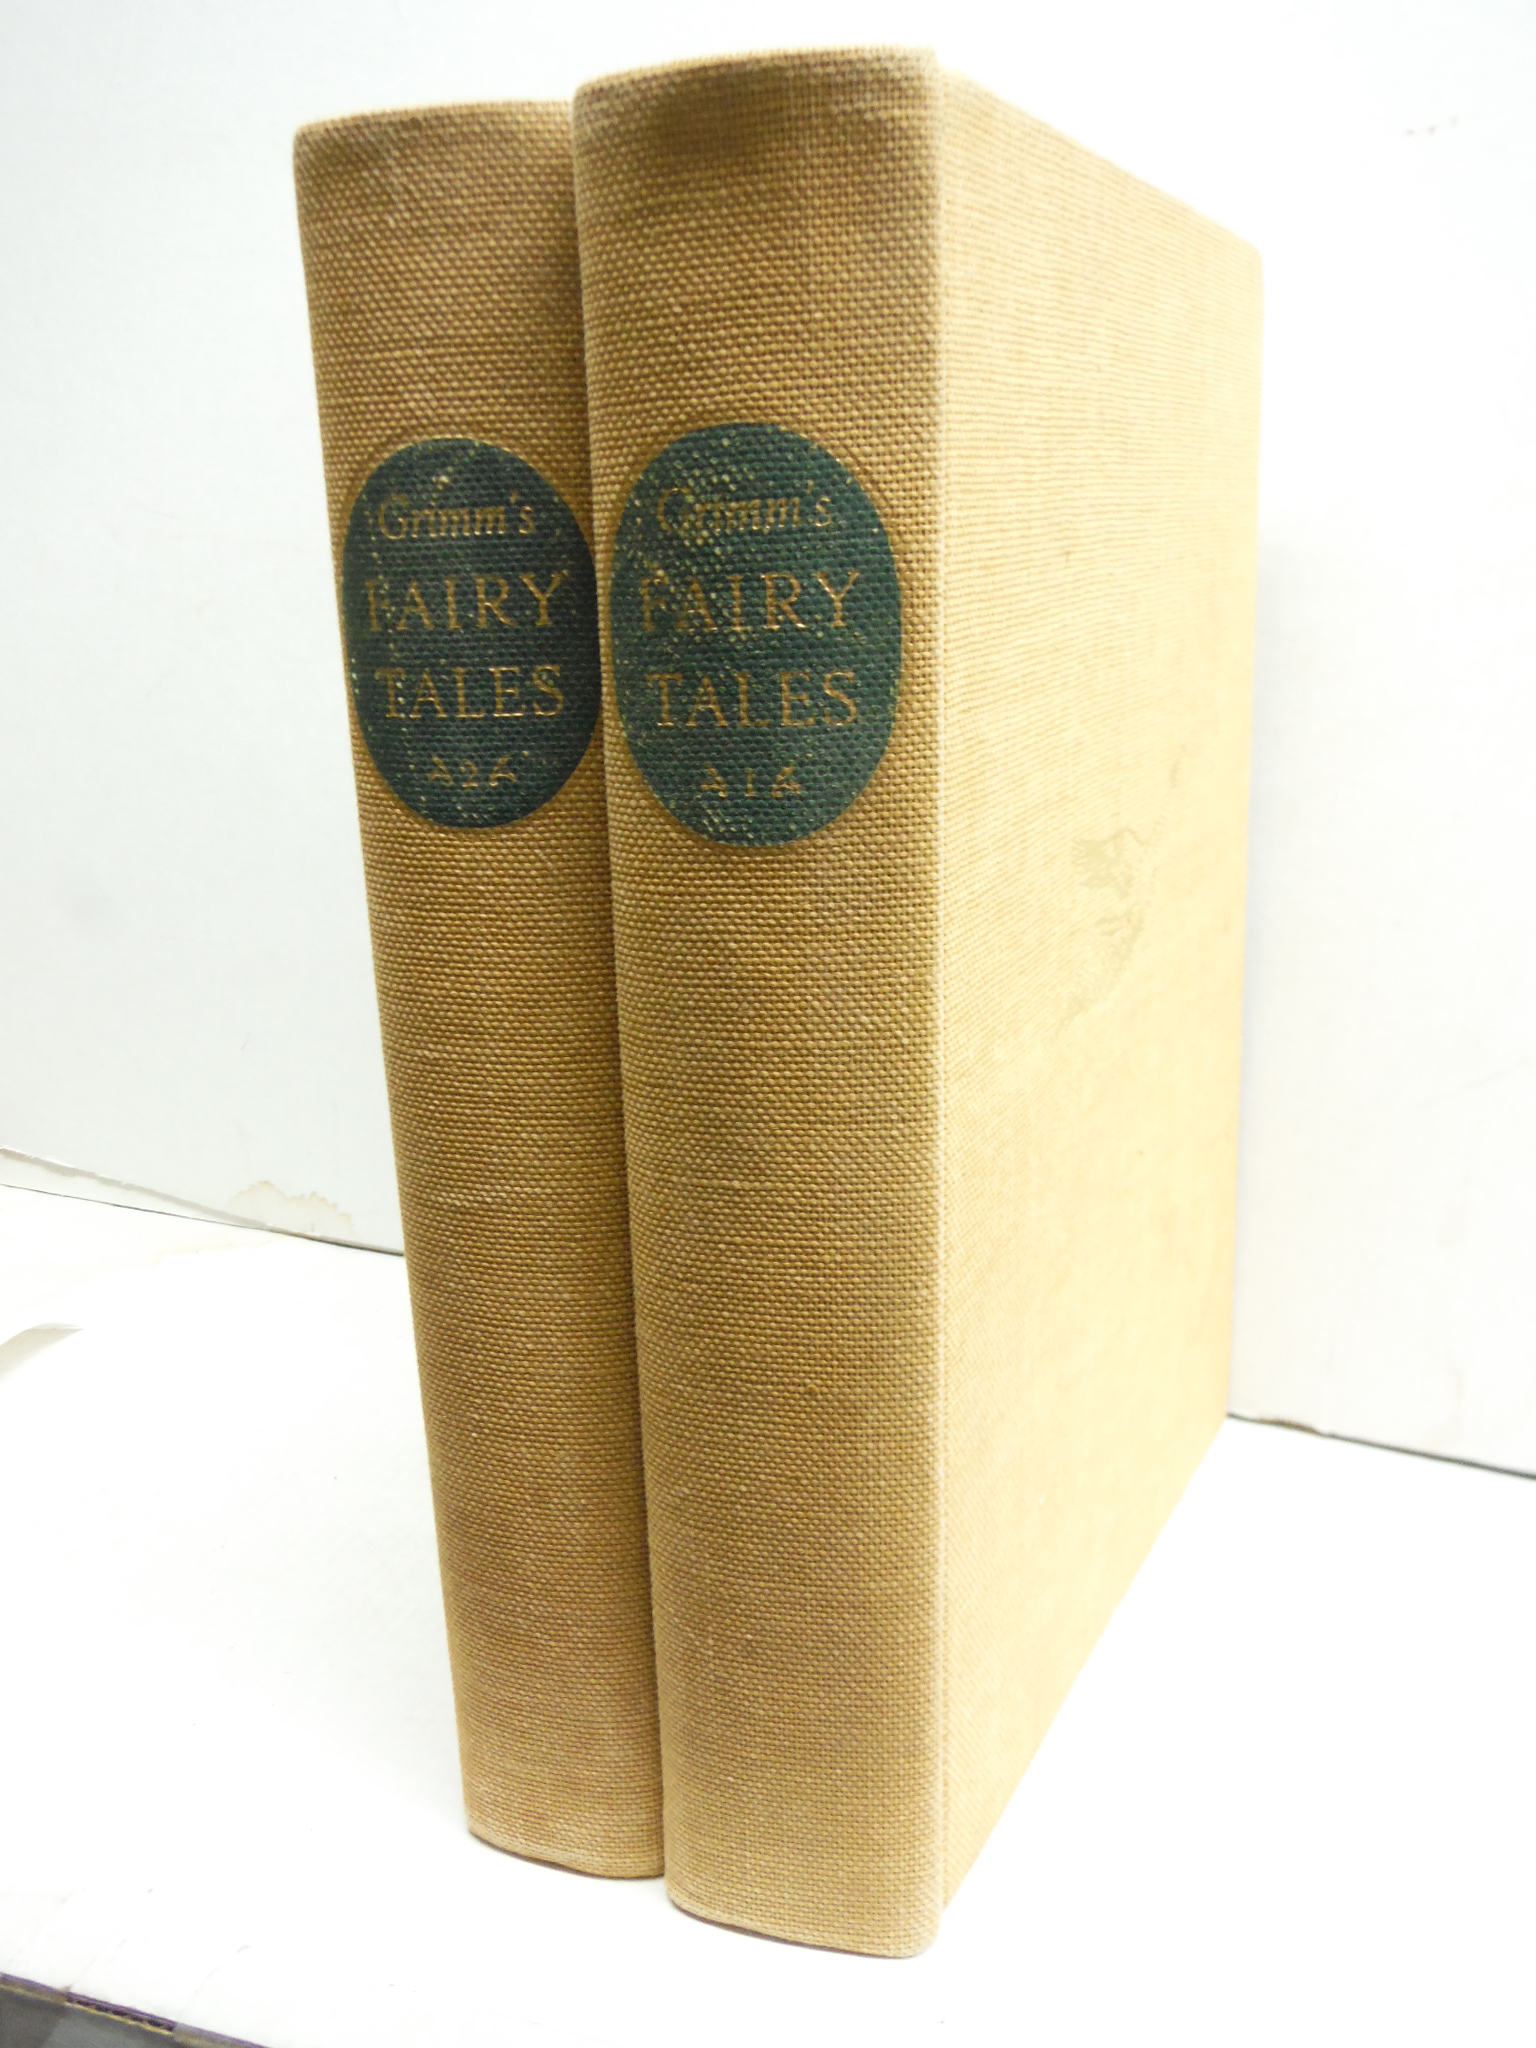 Grimms Fairy Tales 2 Volumes